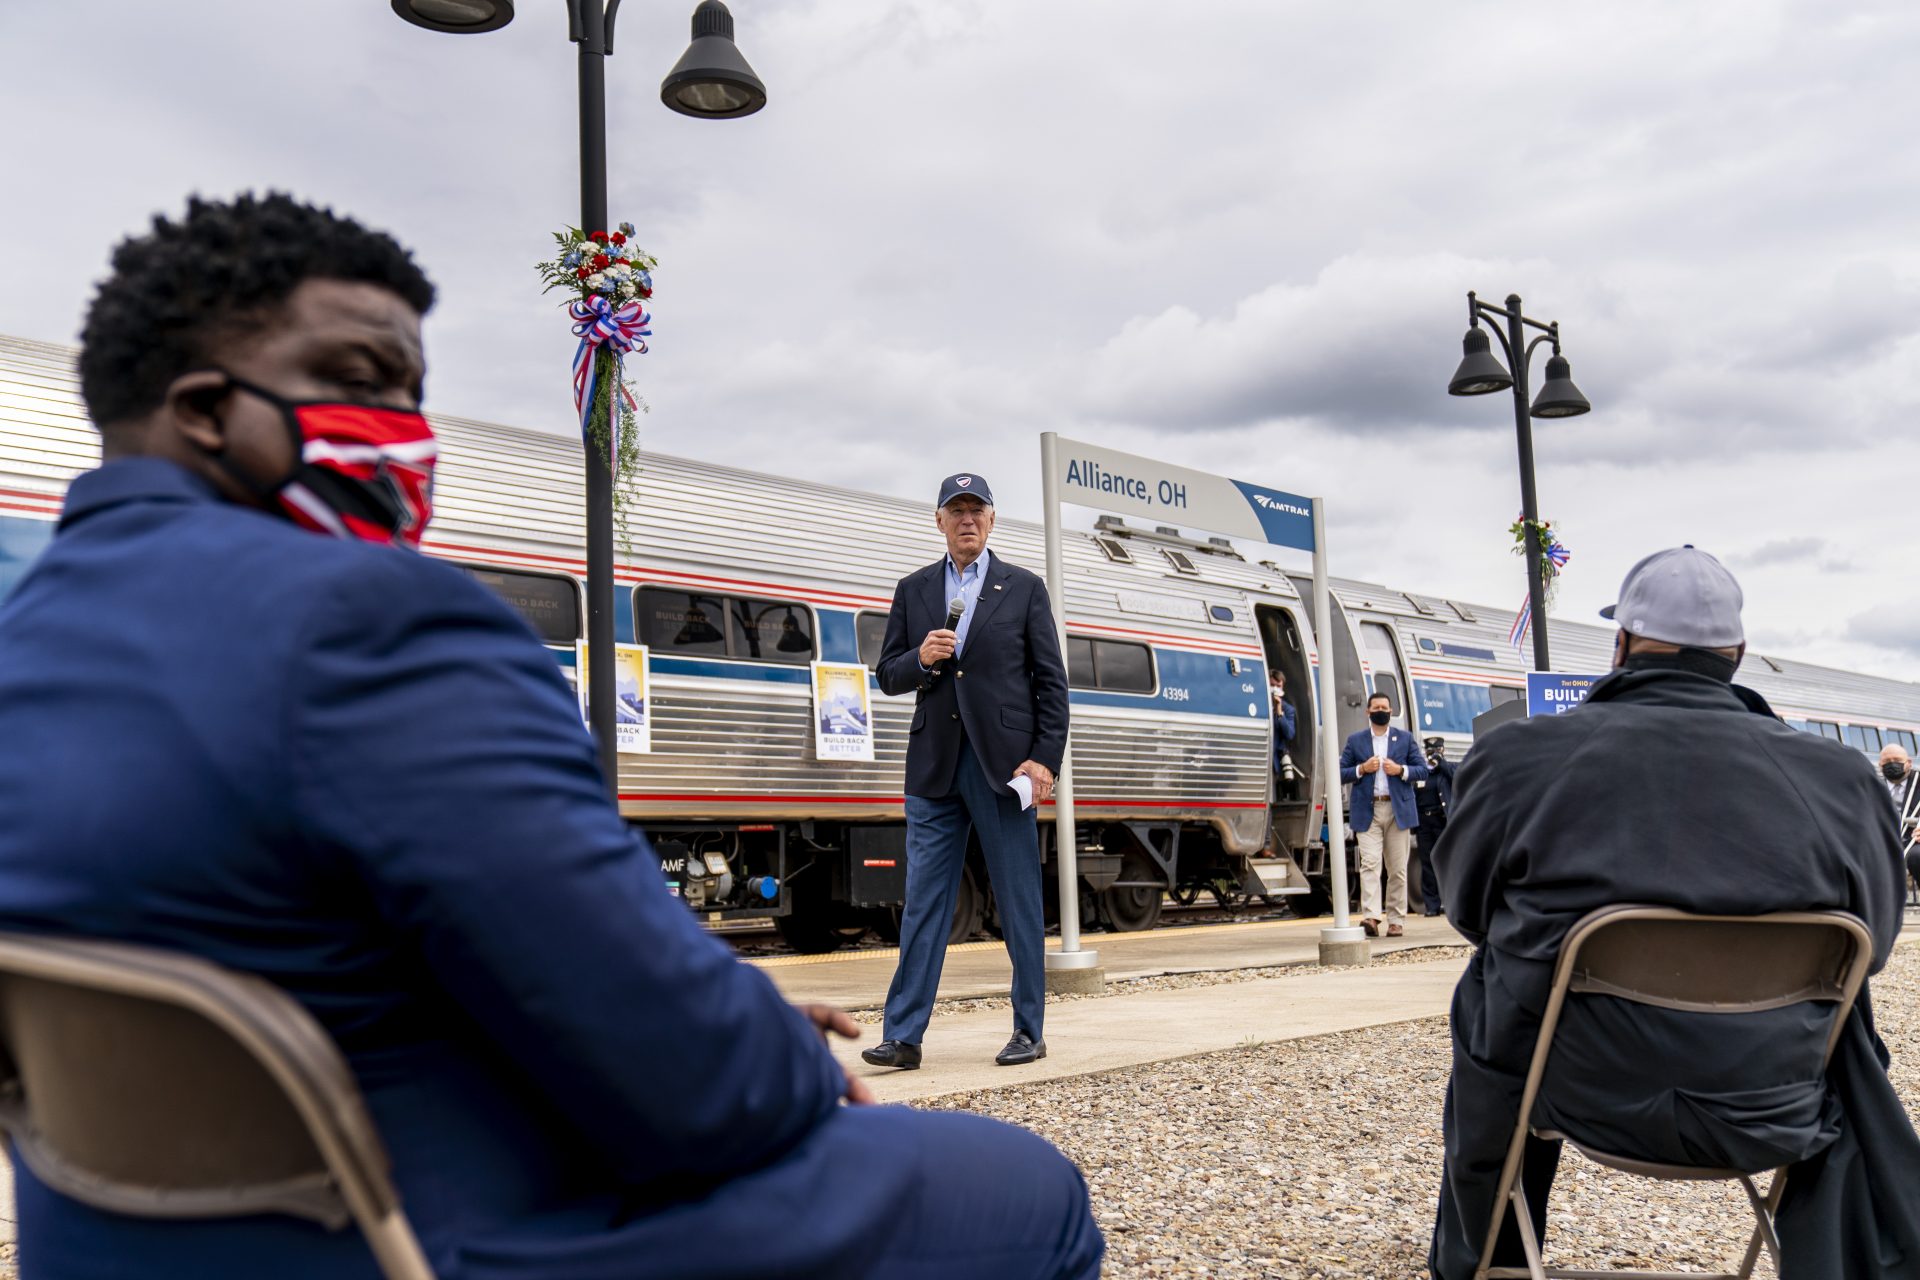 Democratic presidential candidate former Vice President Joe Biden speaks at Amtrak's Alliance Train Station, Wednesday, Sept. 30, 2020, in Alliance, Ohio. Biden is on a train tour through Ohio and Pennsylvania today.